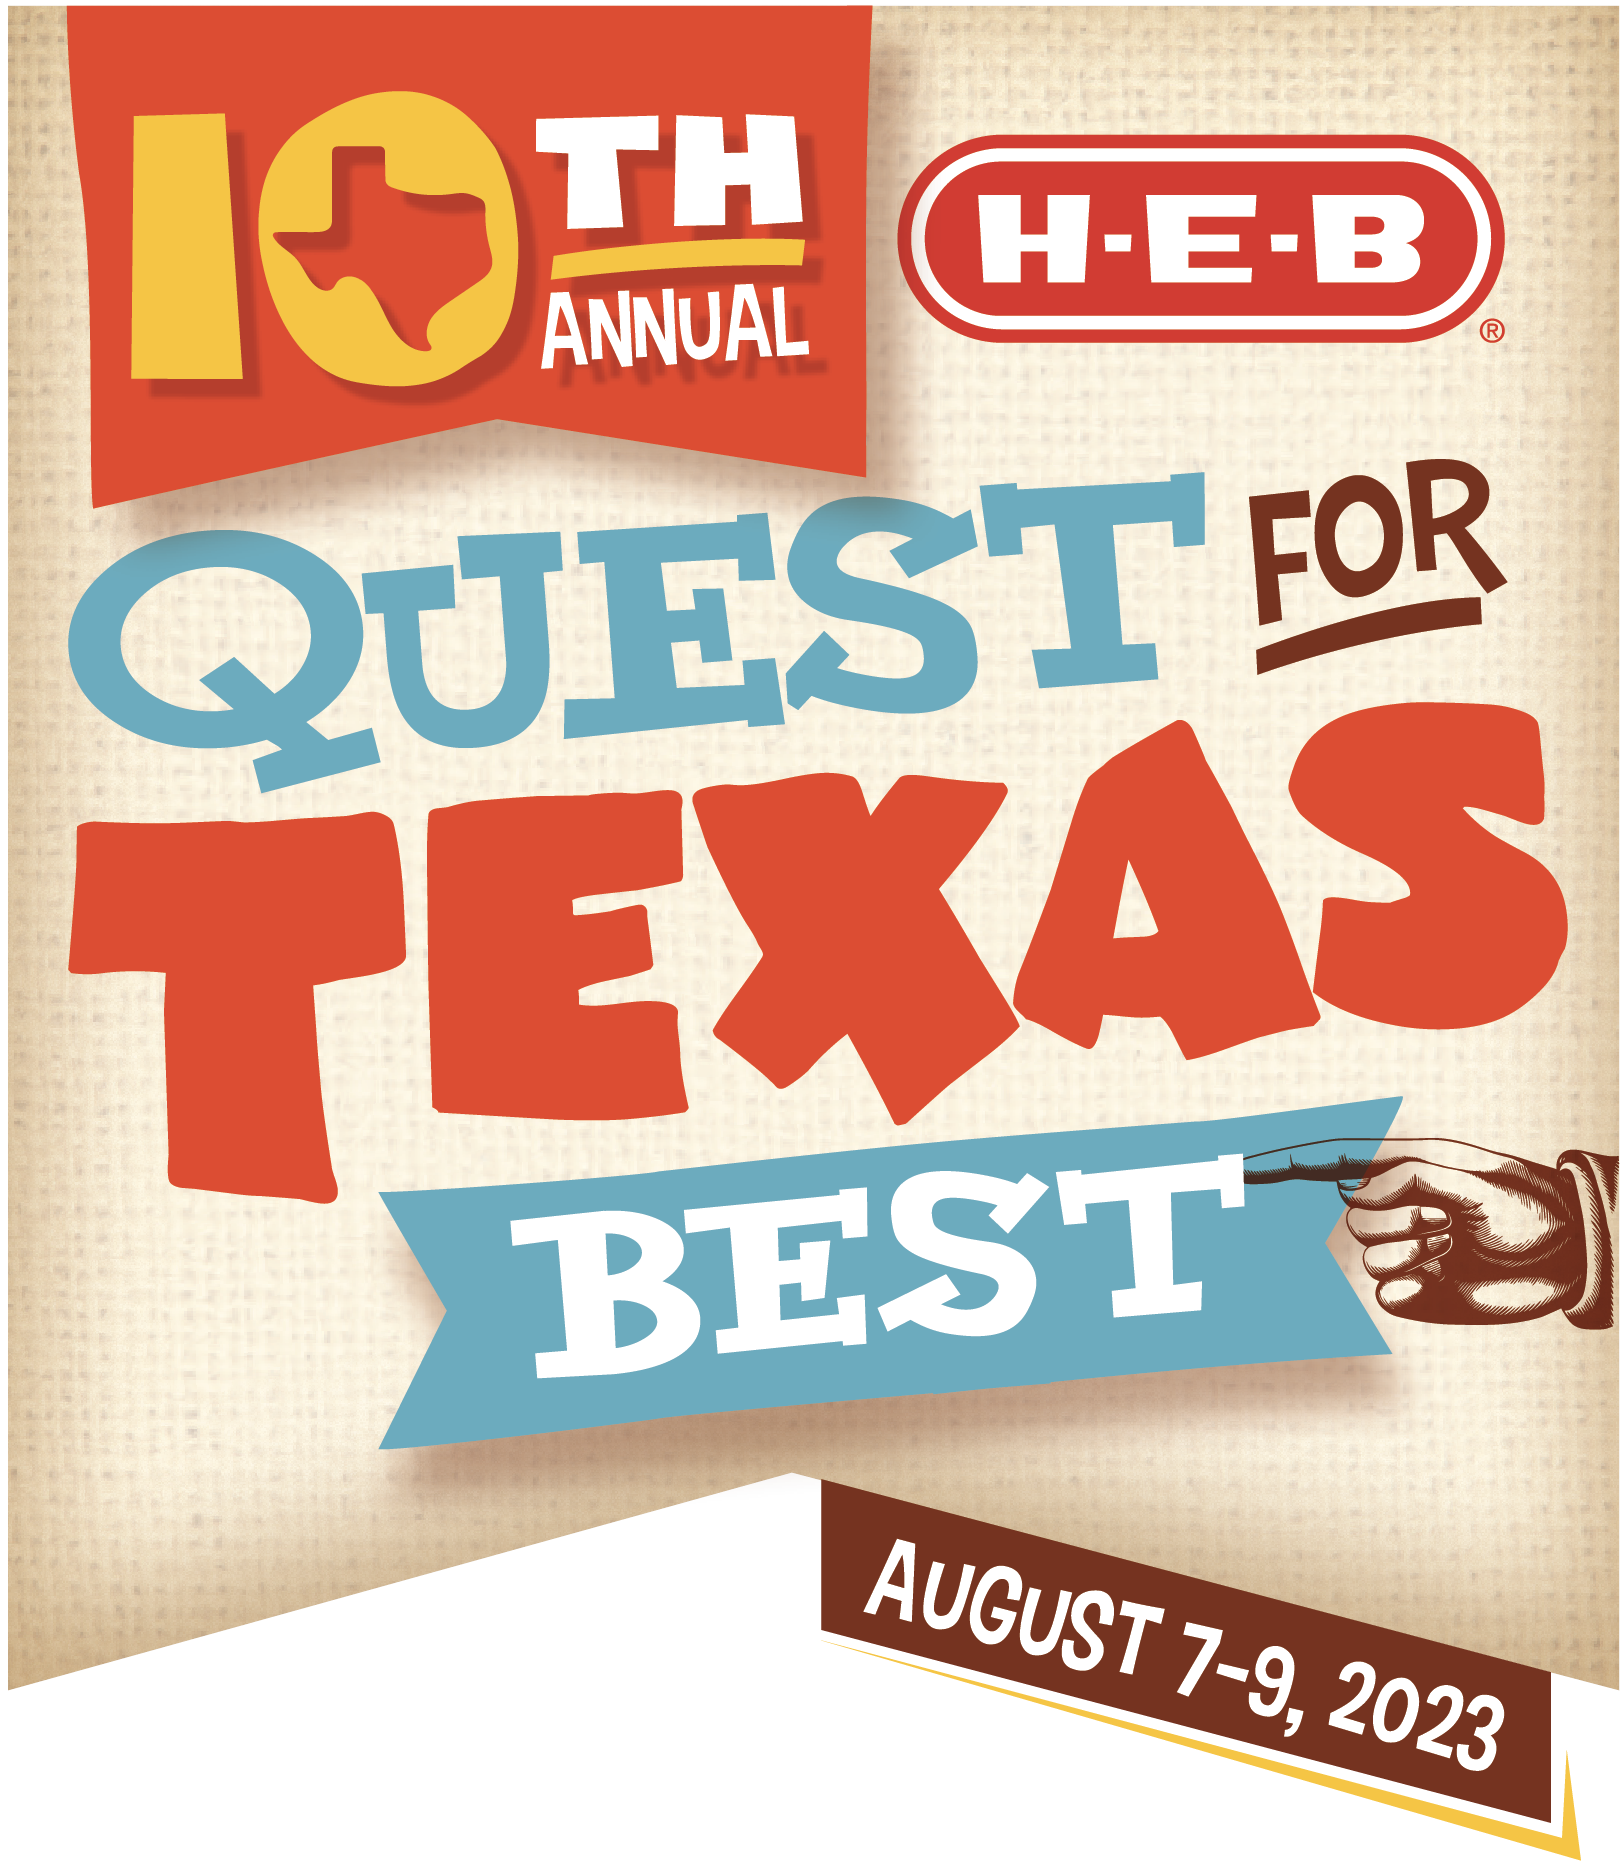 HEB names finalists for 10th annual Quest for Texas Best competition